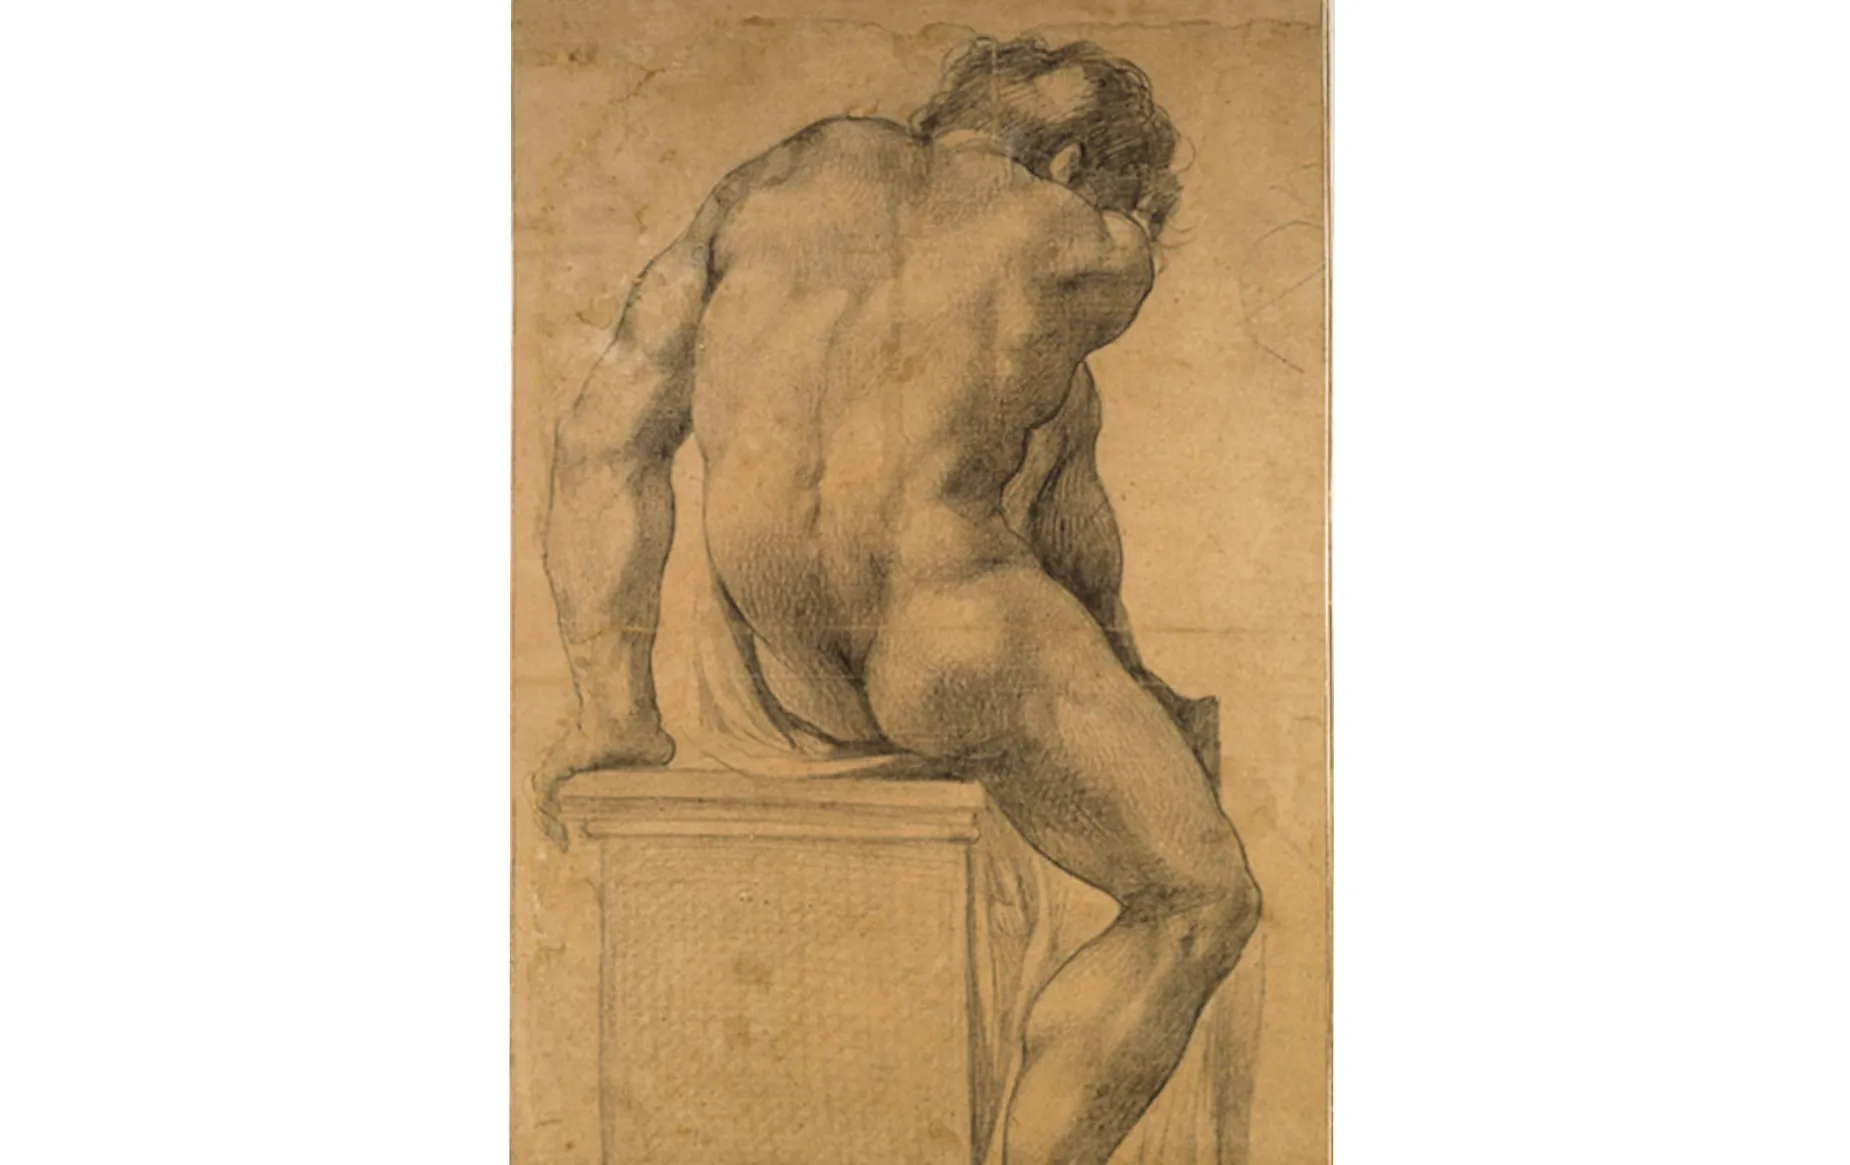 Work from the 'Drawing in Rome' exhibition